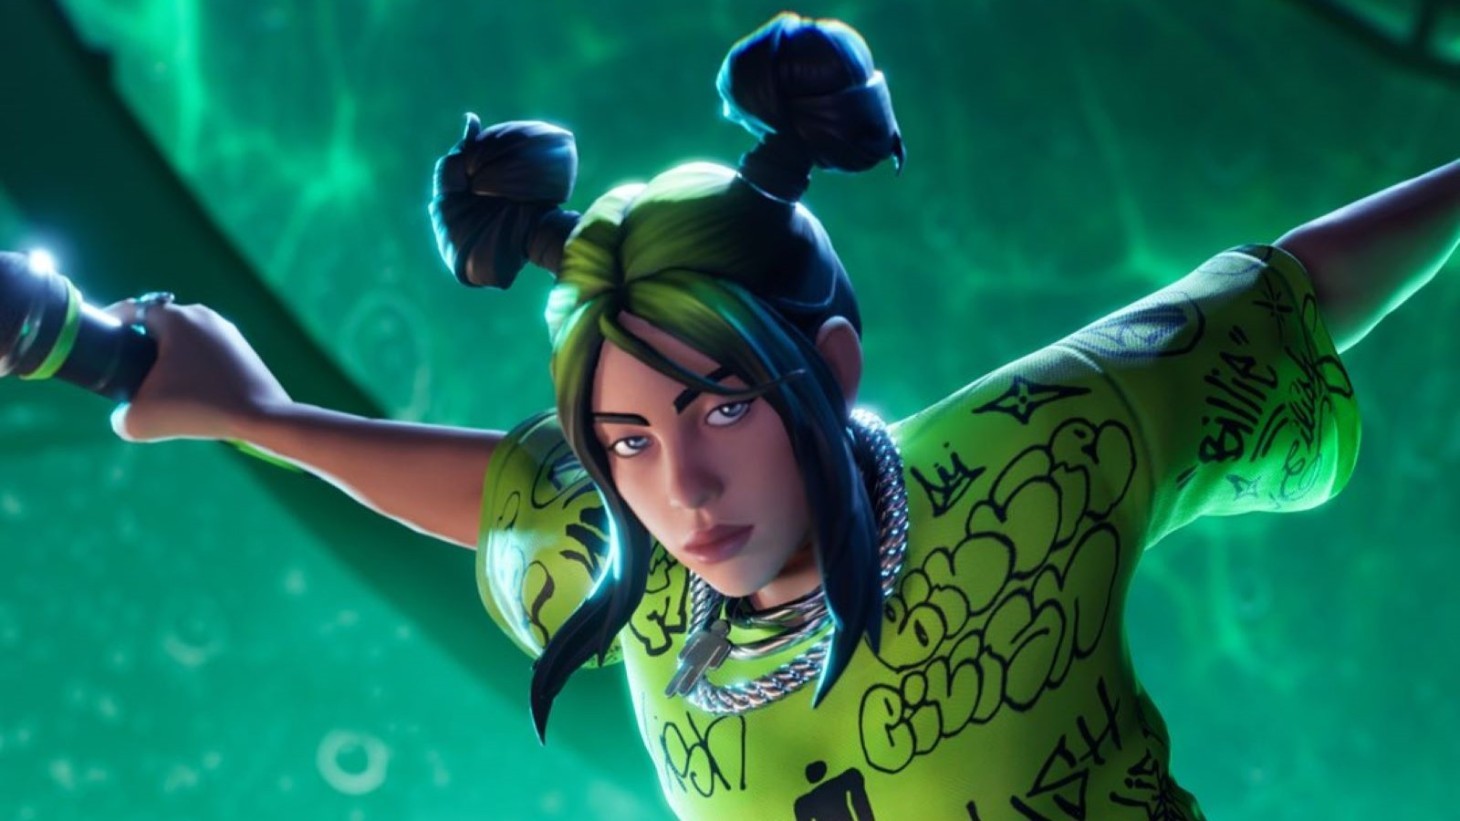 Fortnite Festival is getting a major update with the "lovely" singer